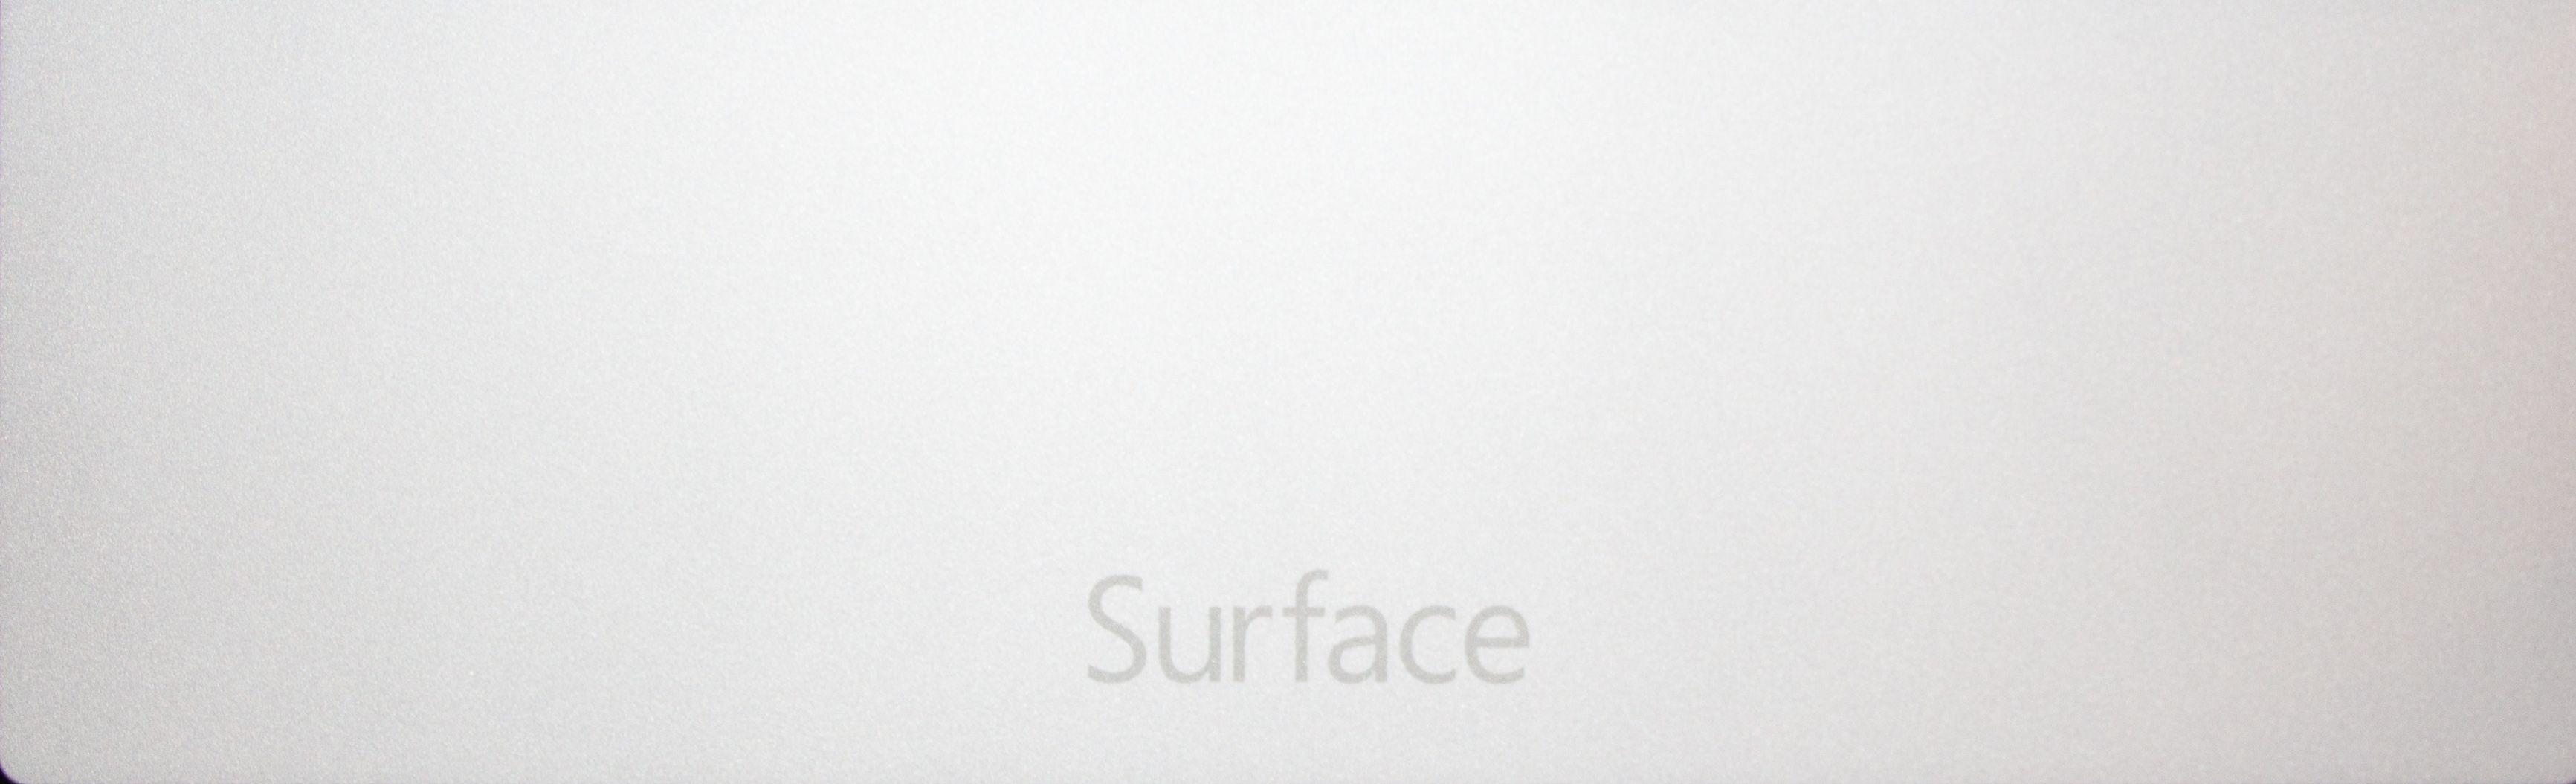 Windows Surface Logo - Surface 2: More than a tablet | Ars Technica